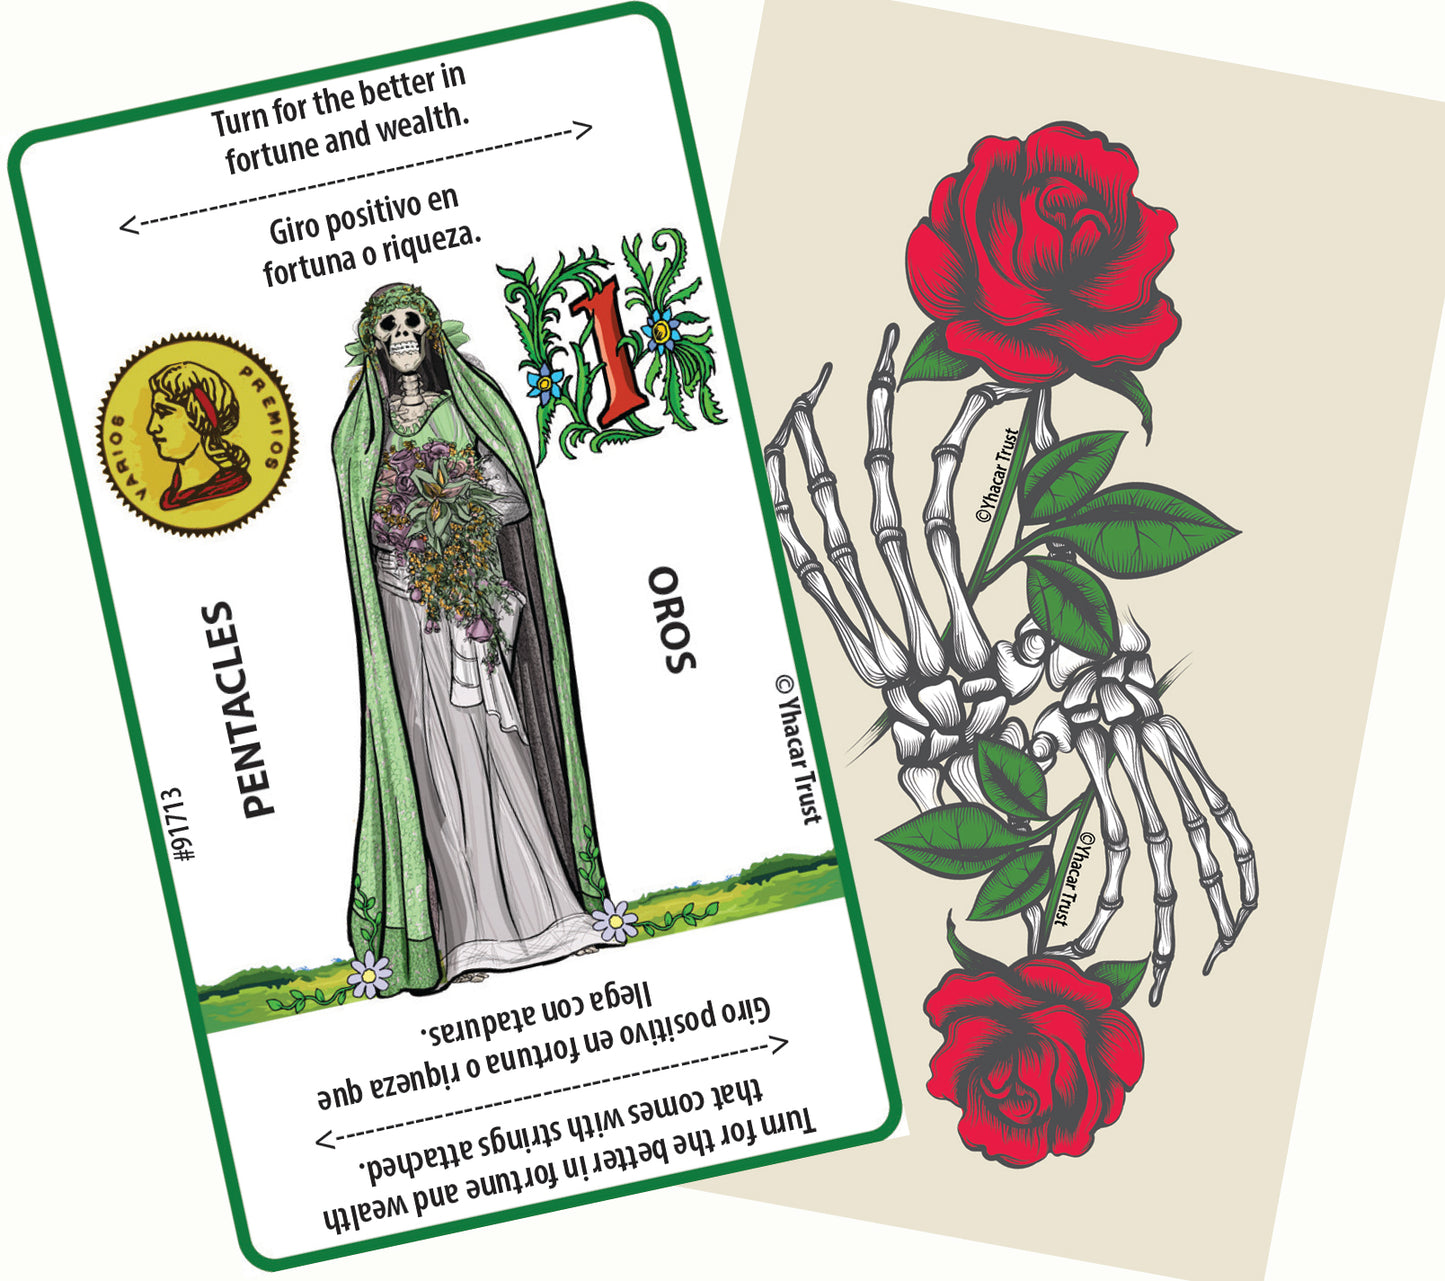 Divination Witch Cards of the Holy Death - Book And 48 Cards With Interpretations And Spreads